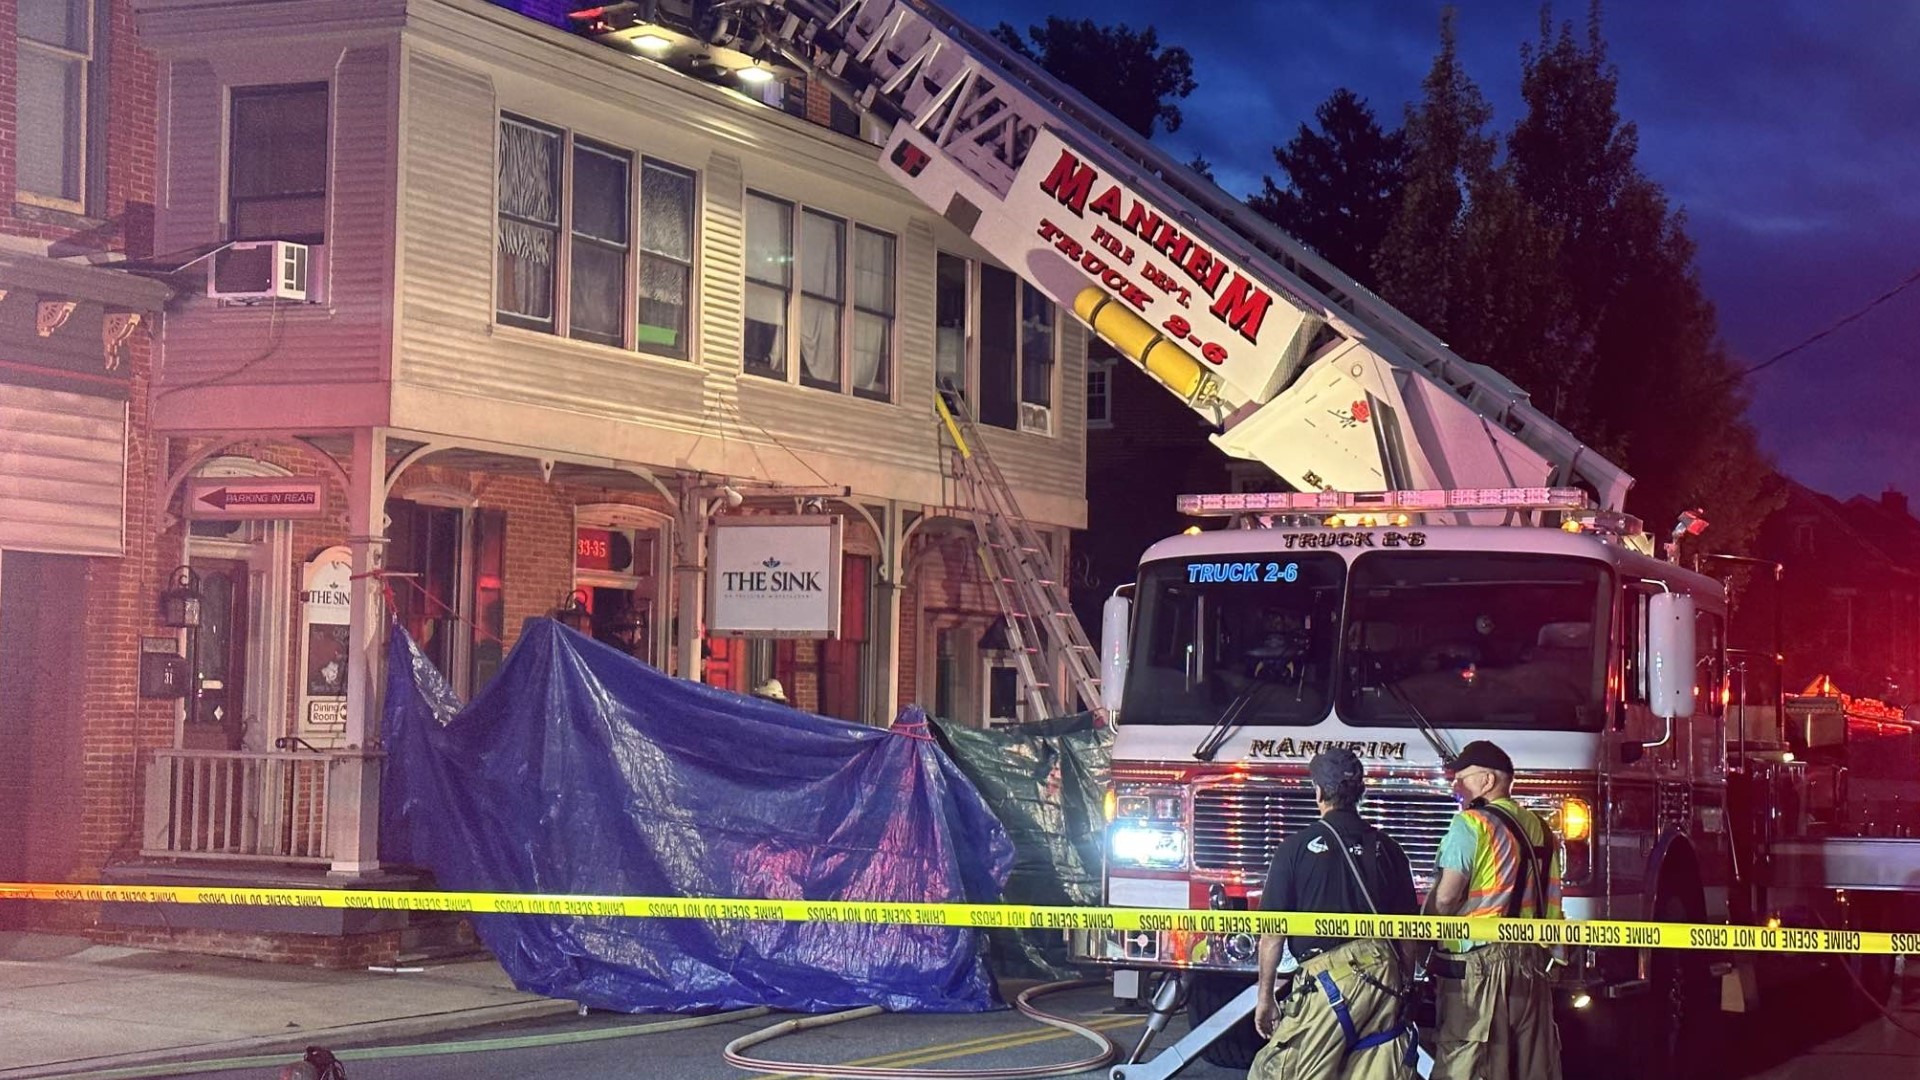 According to officials, the fire sparked around 5:00 a.m. on Sept. 13. A woman in the apartment where the fire began was pronounced dead at the scene.